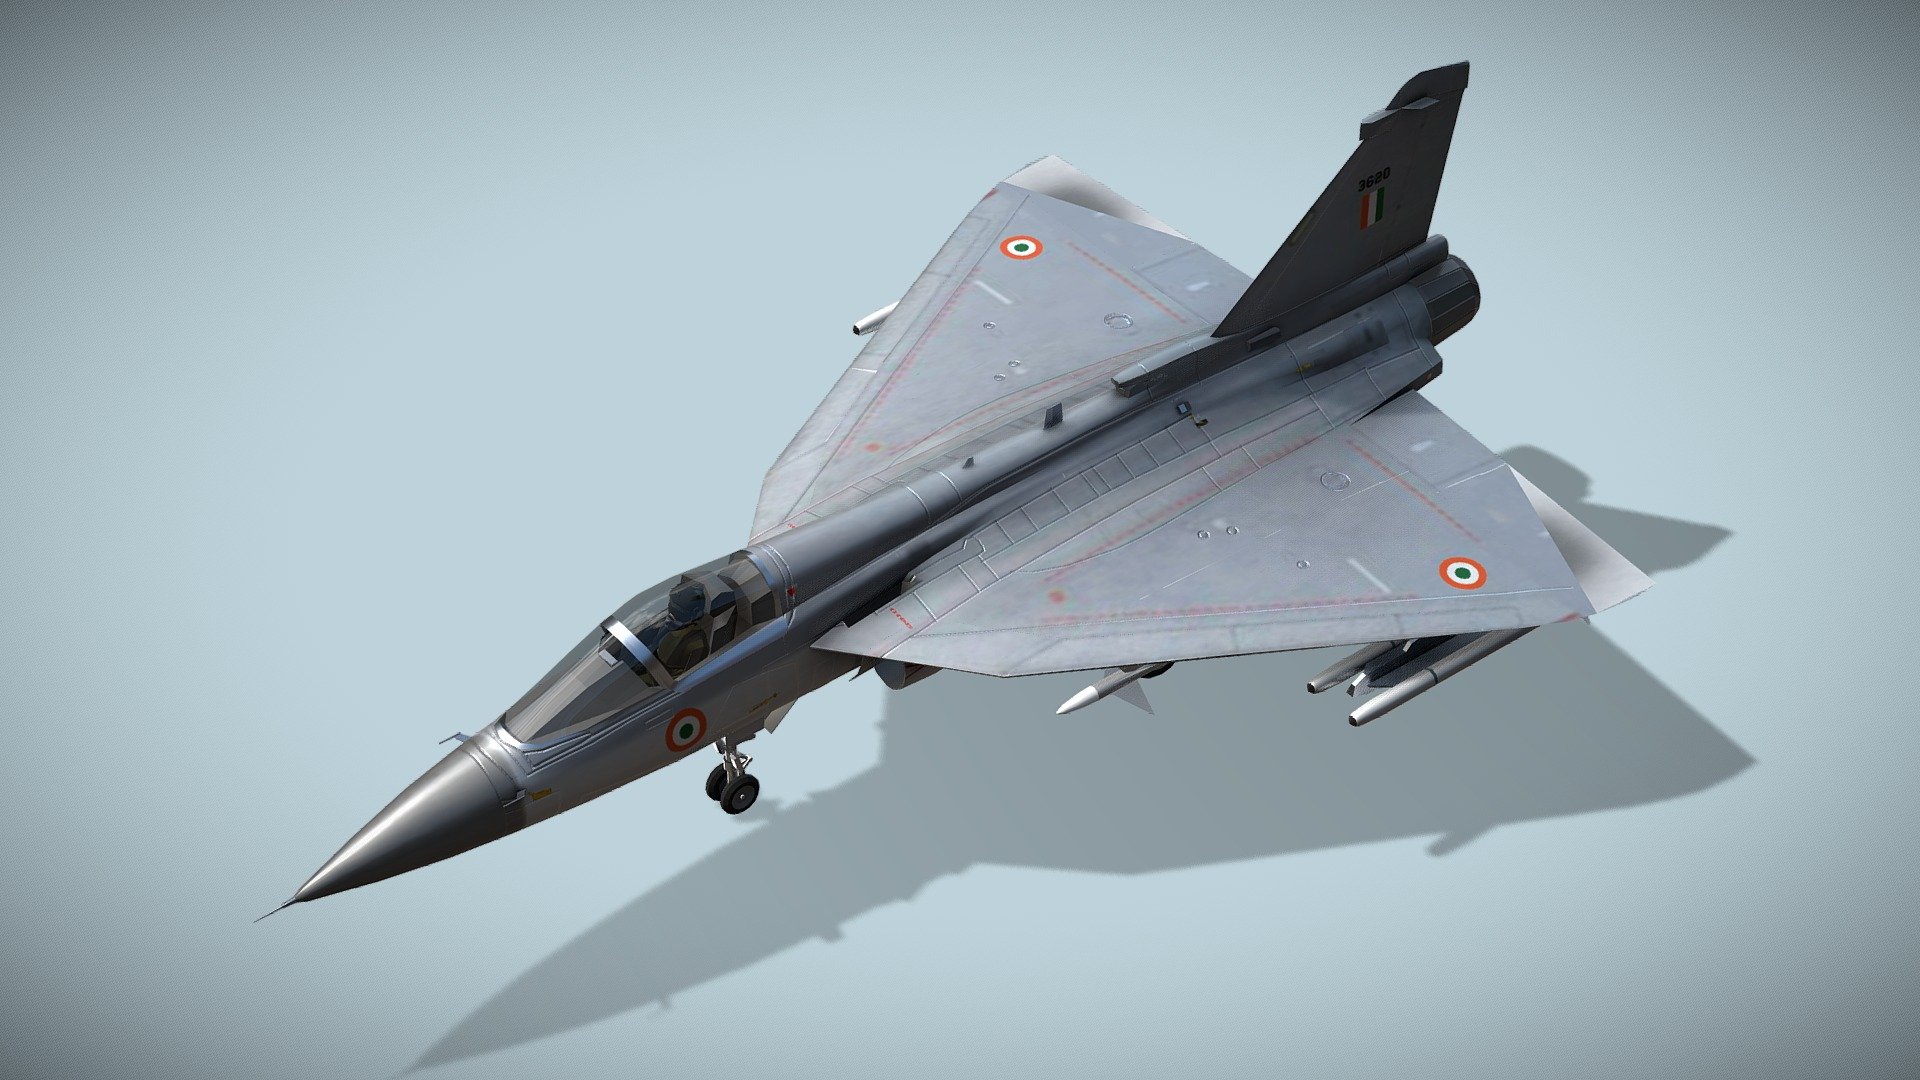 HAL Tejas

Lowpoly model of indian supersonic lightweight fighterjet



The HAL Tejas is an Indian single engine, delta wing, light multirole fighter designed by the Aeronautical Development Agency (ADA) in collaboration with Aircraft Research and Design Centre (ARDC) of Hindustan Aeronautics Limited (HAL) for the Indian Air Force and Indian Navy. It was developed from the Light Combat Aircraft (LCA) programme, which began in the 1980s to replace India's ageing MiG-21 fighters but later became part of a general fleet modernisation programme. In 2003, the LCA was officially named &ldquo;Tejas